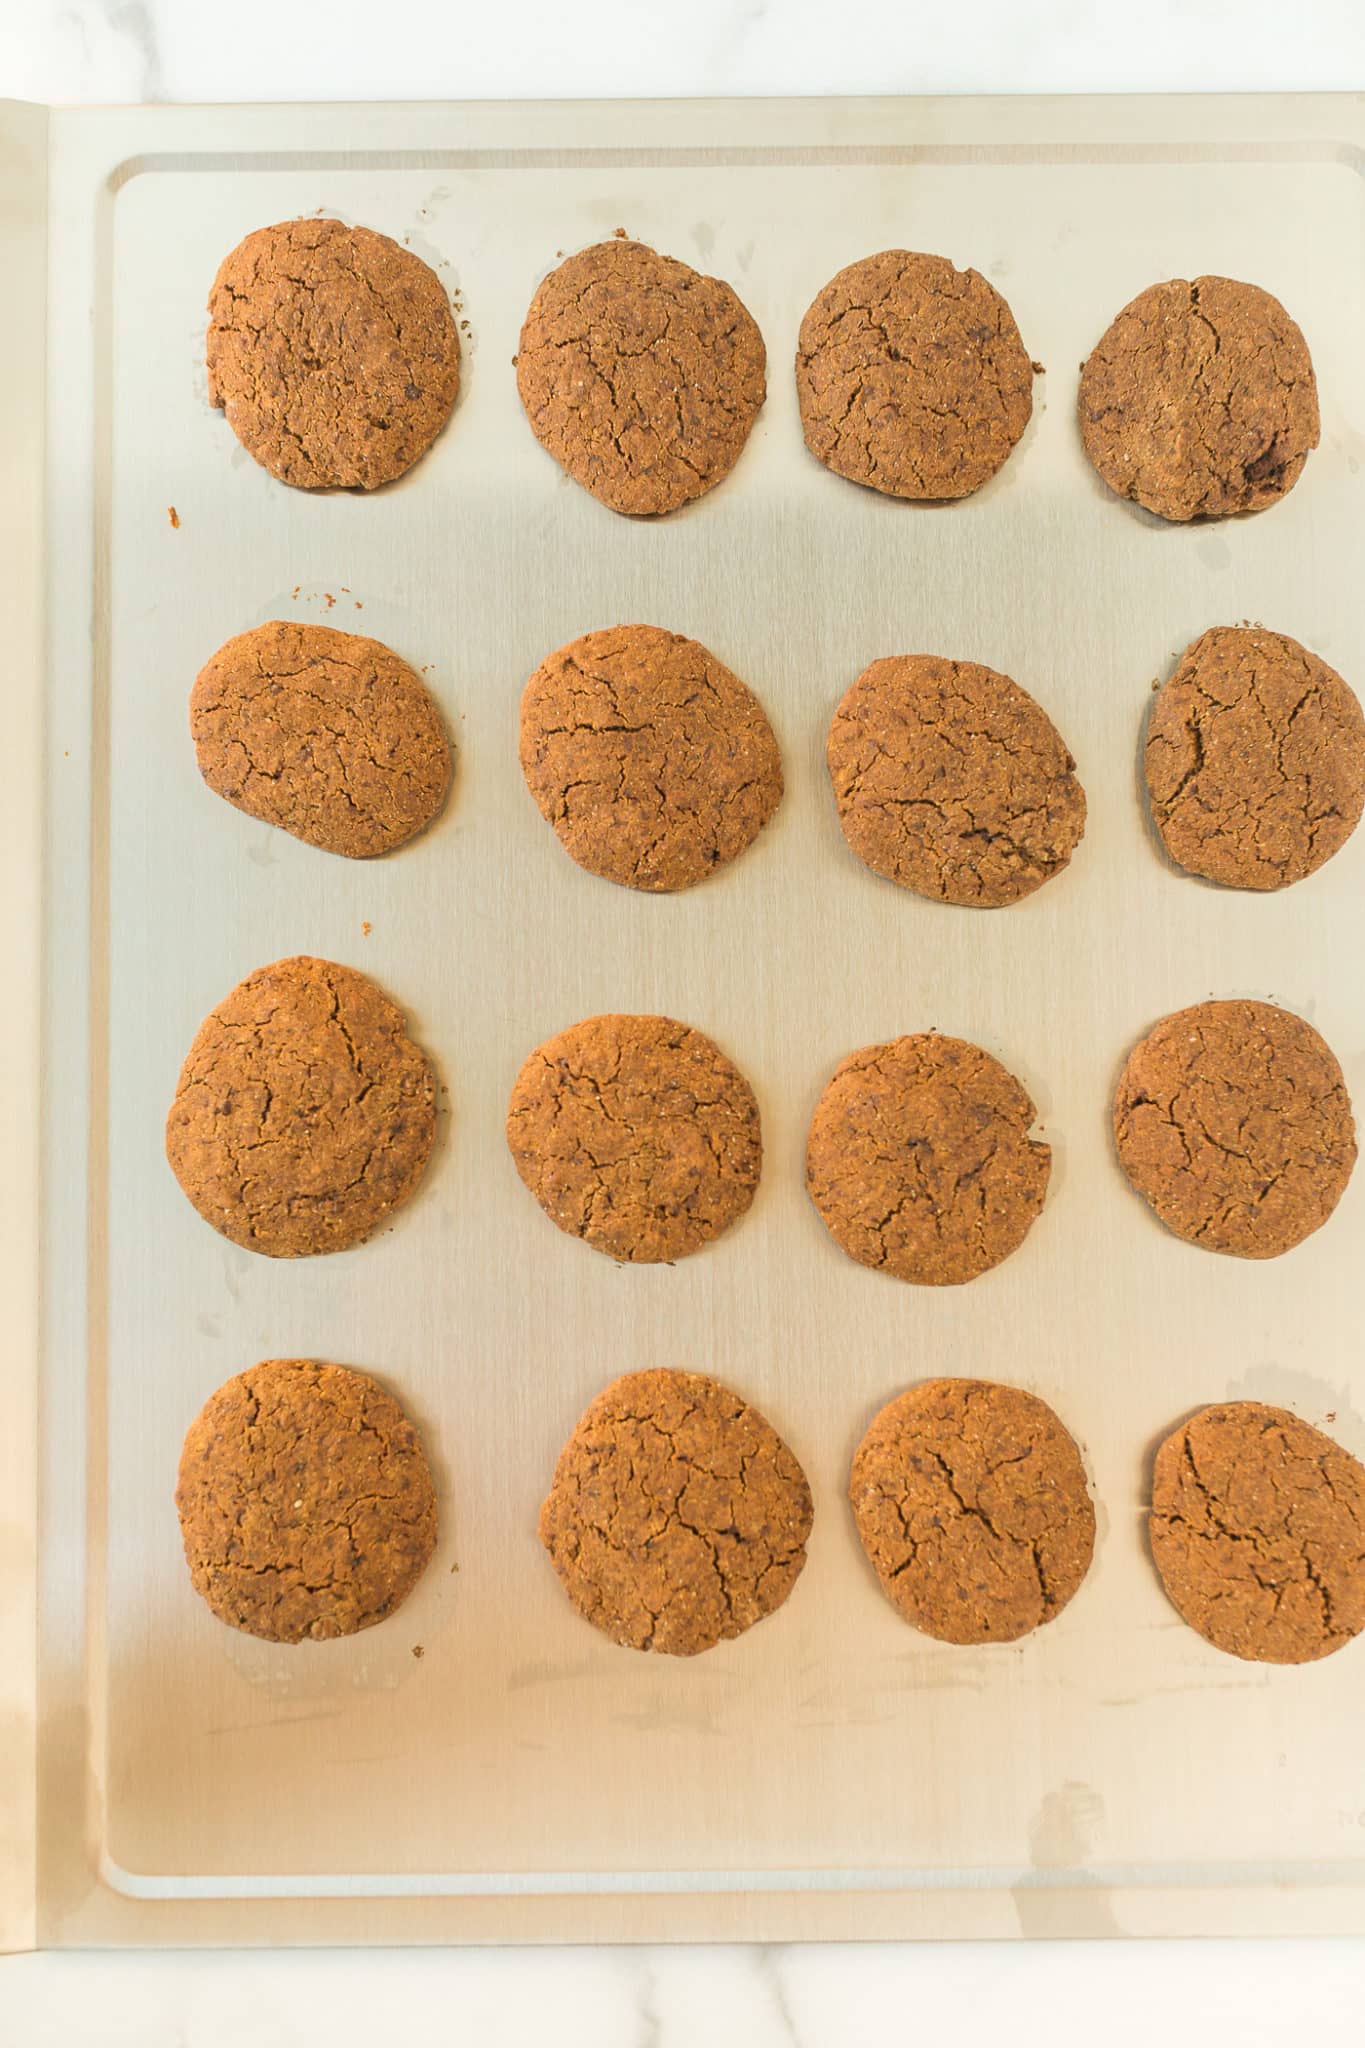 molasses cookies on a stainless steel baking sheet.